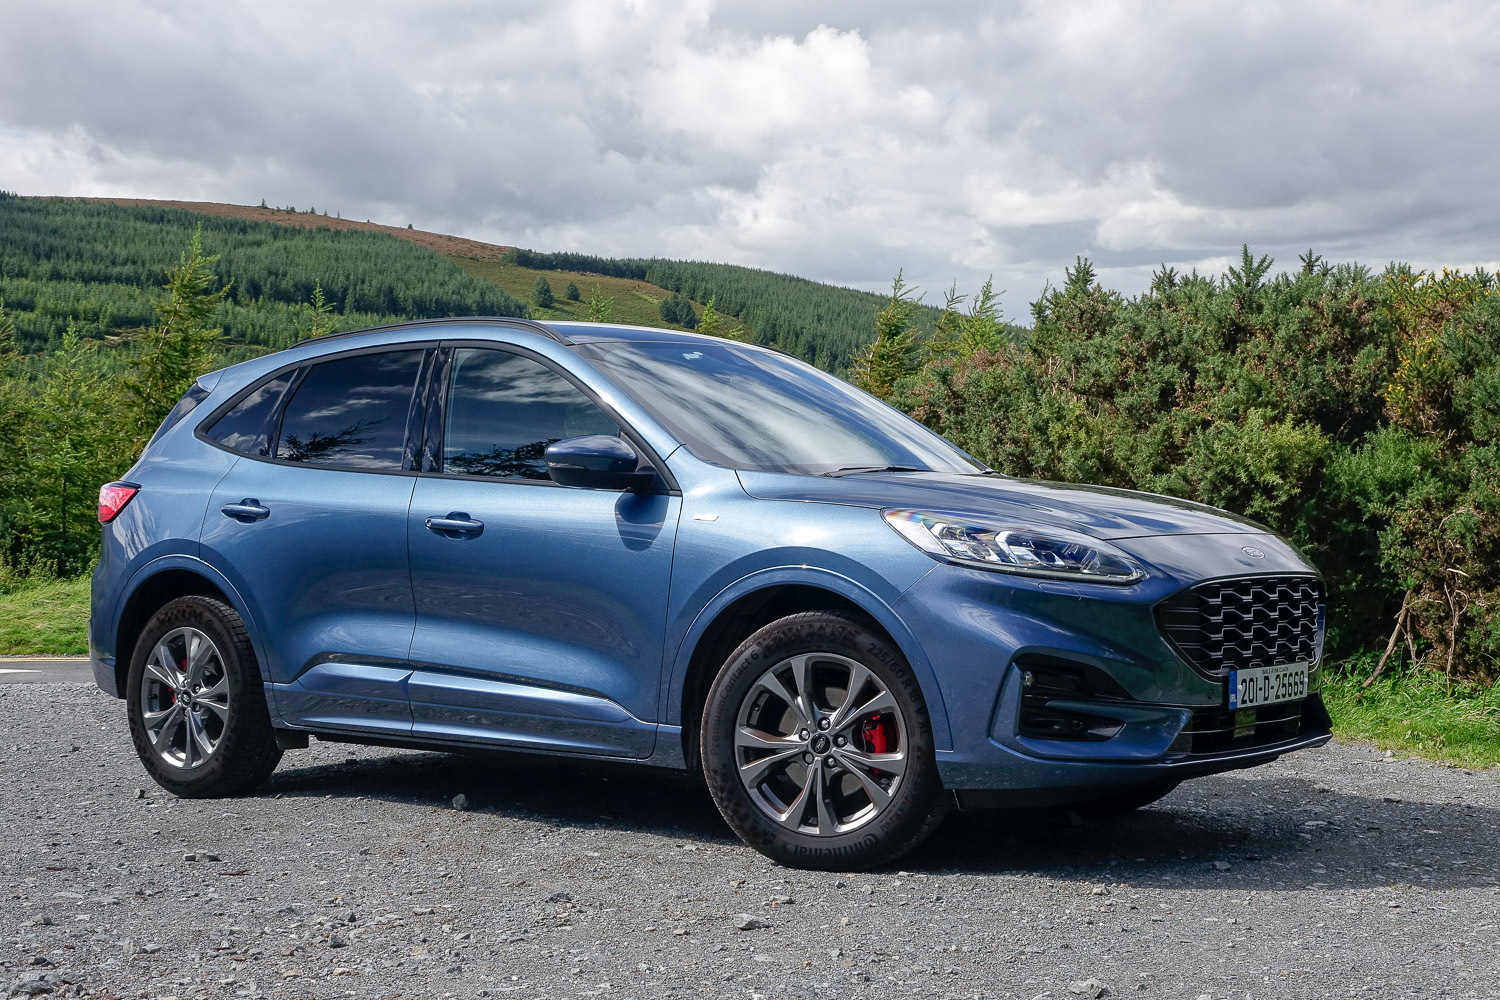 Ford Kuga 1.5 EcoBlue diesel (2020) Reviews Complete Car